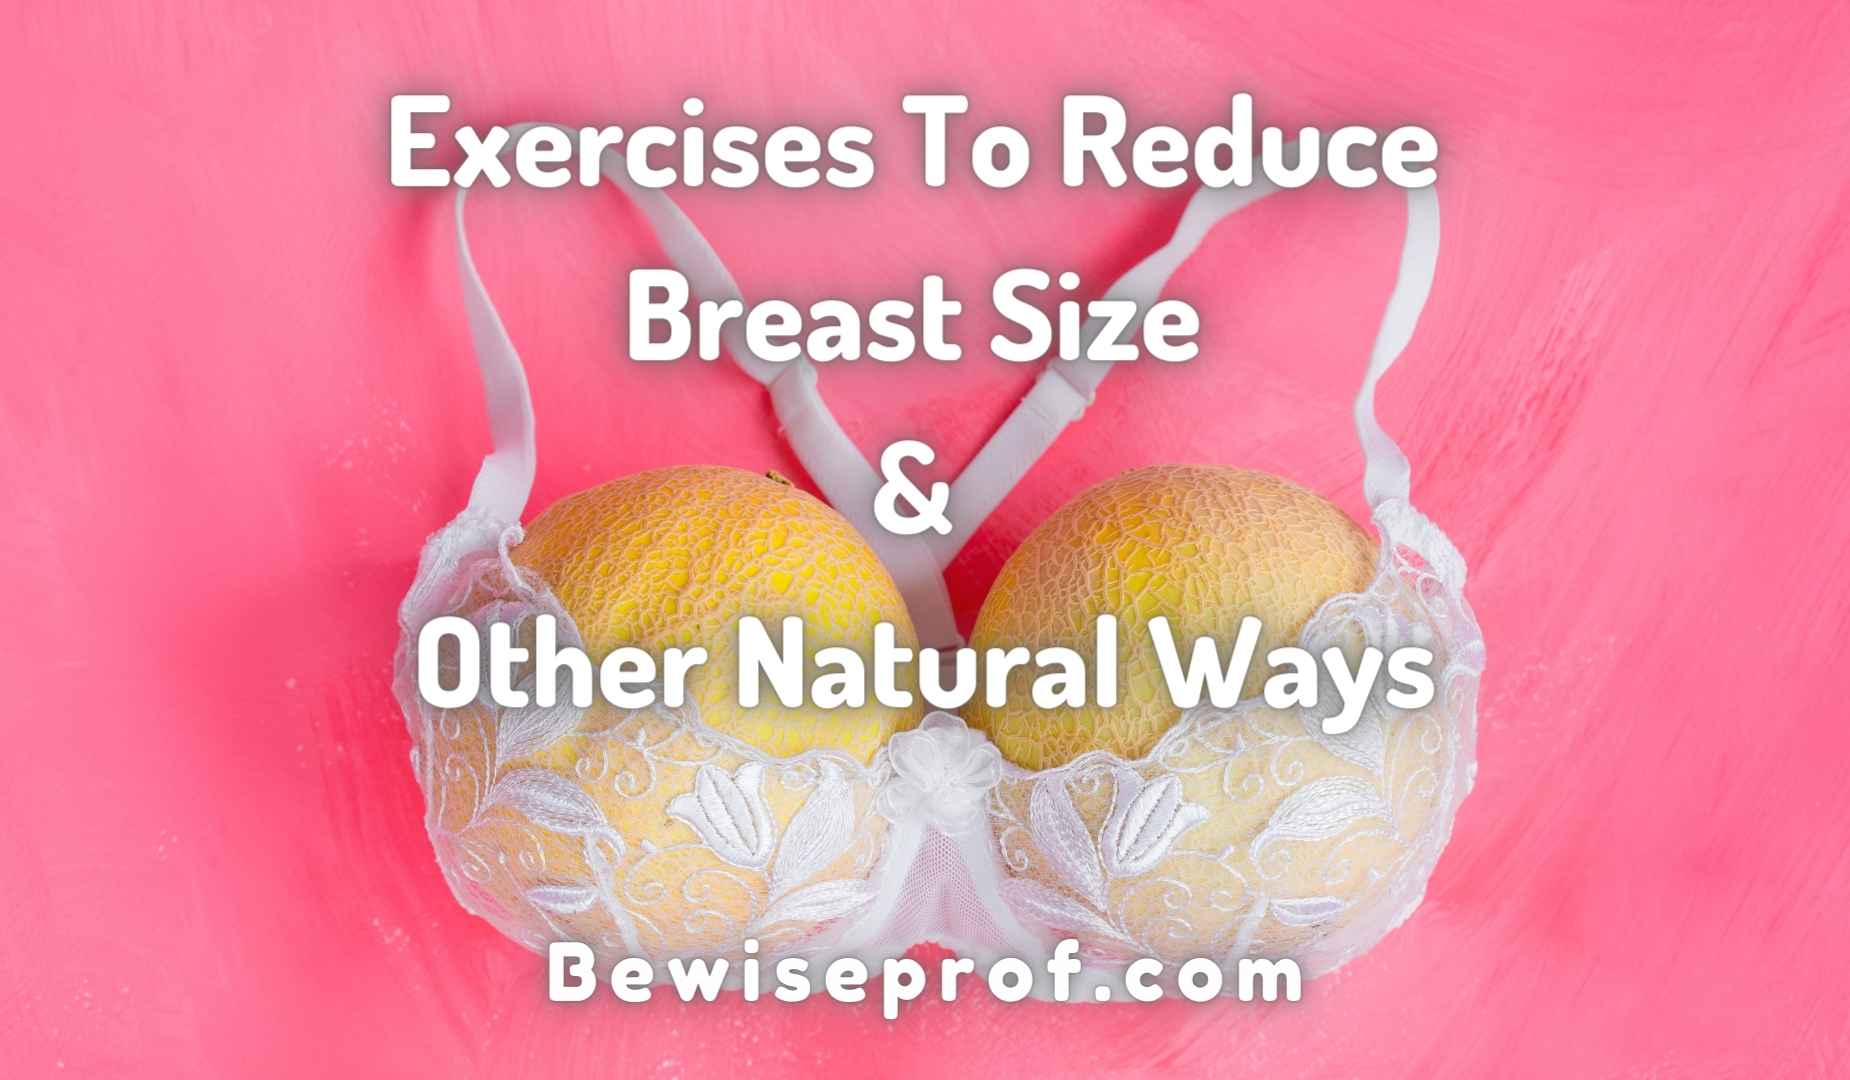 Exercises To Reduce Breast Size And Other Natural Ways